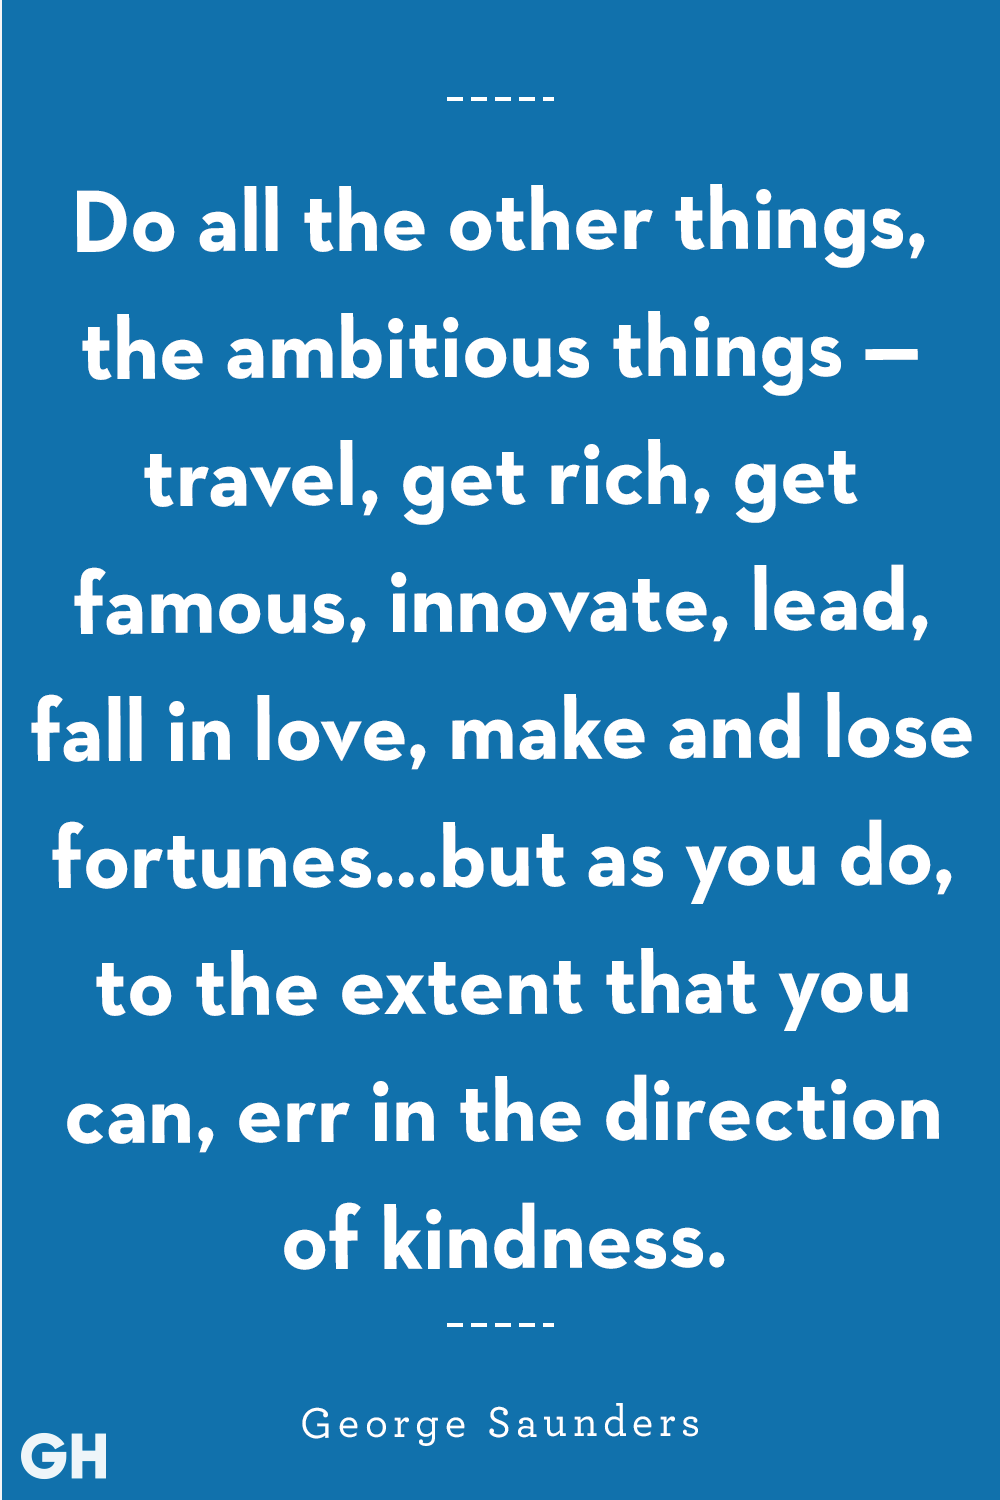 ambition quotes and sayings